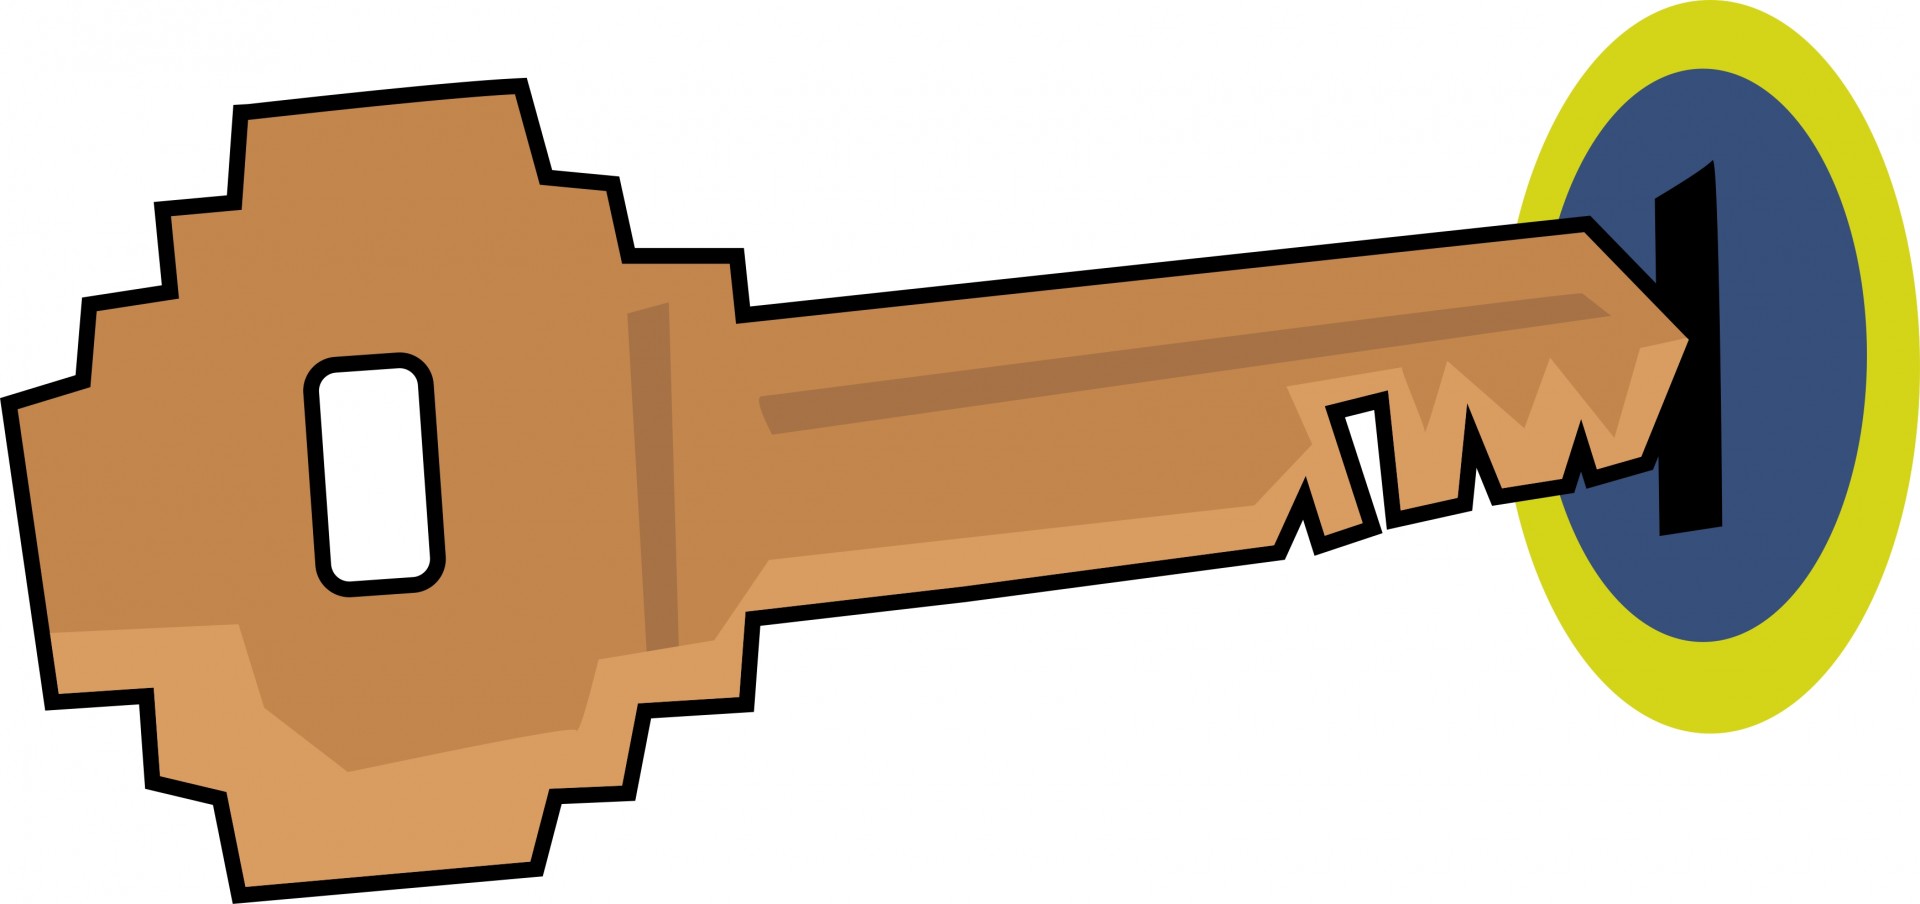 clip art picture of a key - photo #37